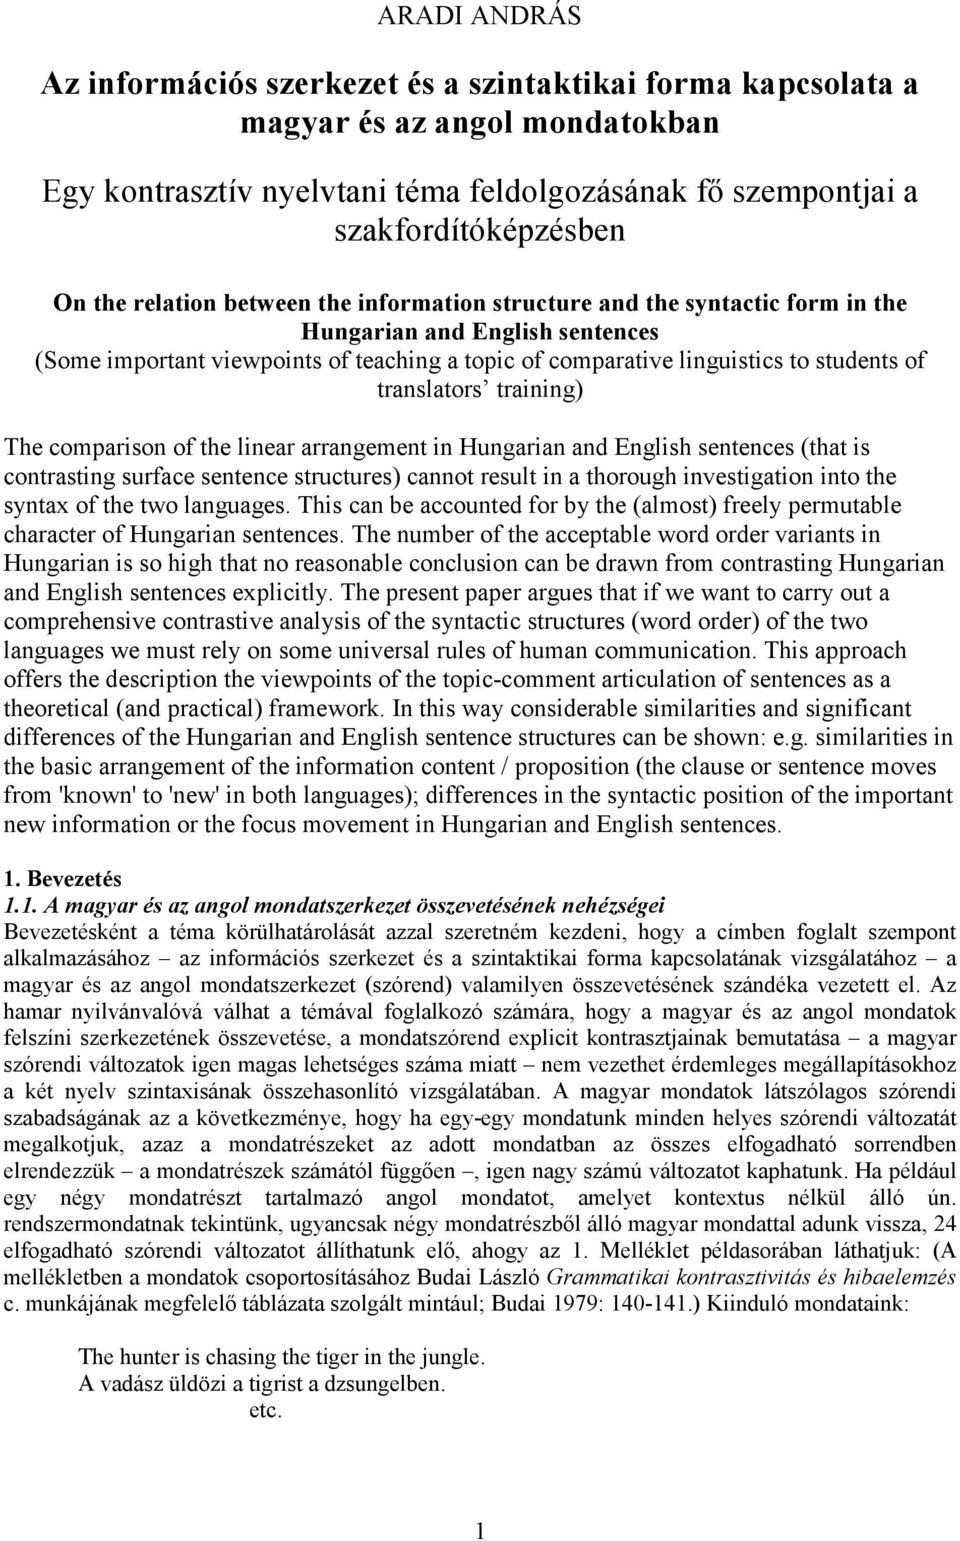 translators training) The comparison of the linear arrangement in Hungarian and English sentences (that is contrasting surface sentence structures) cannot result in a thorough investigation into the